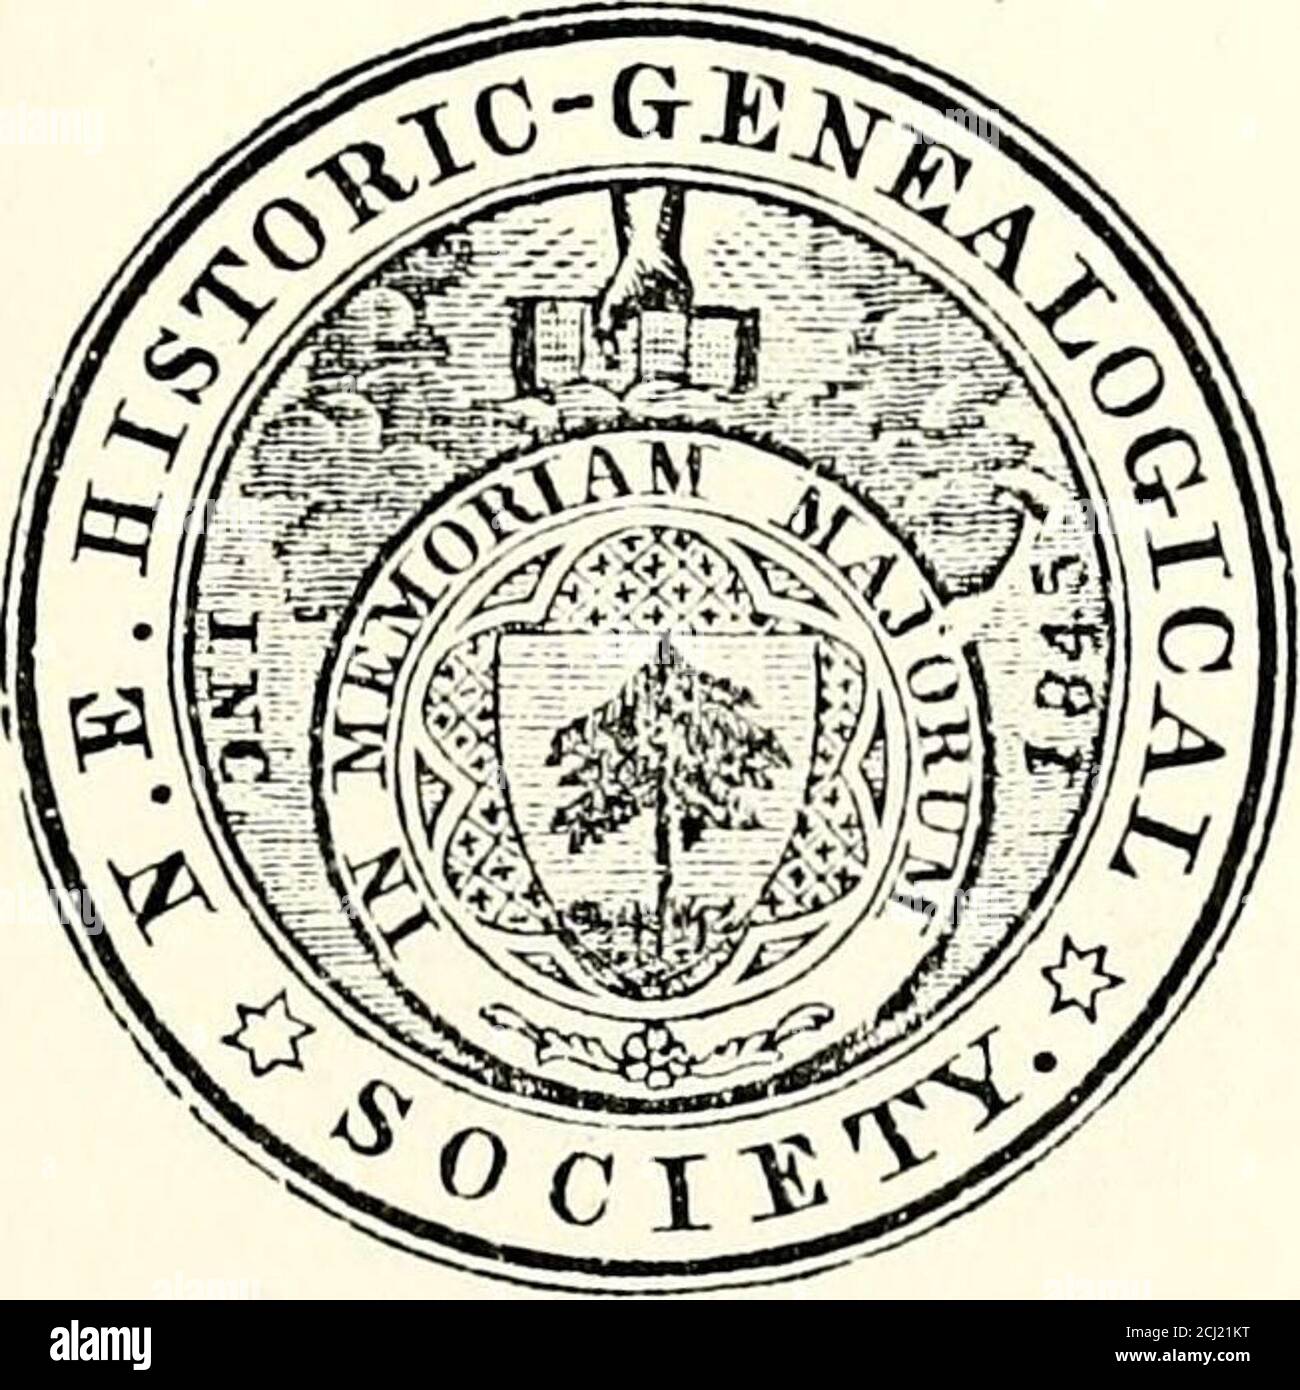 The New England Historical and Genealogical Register, Volume 66